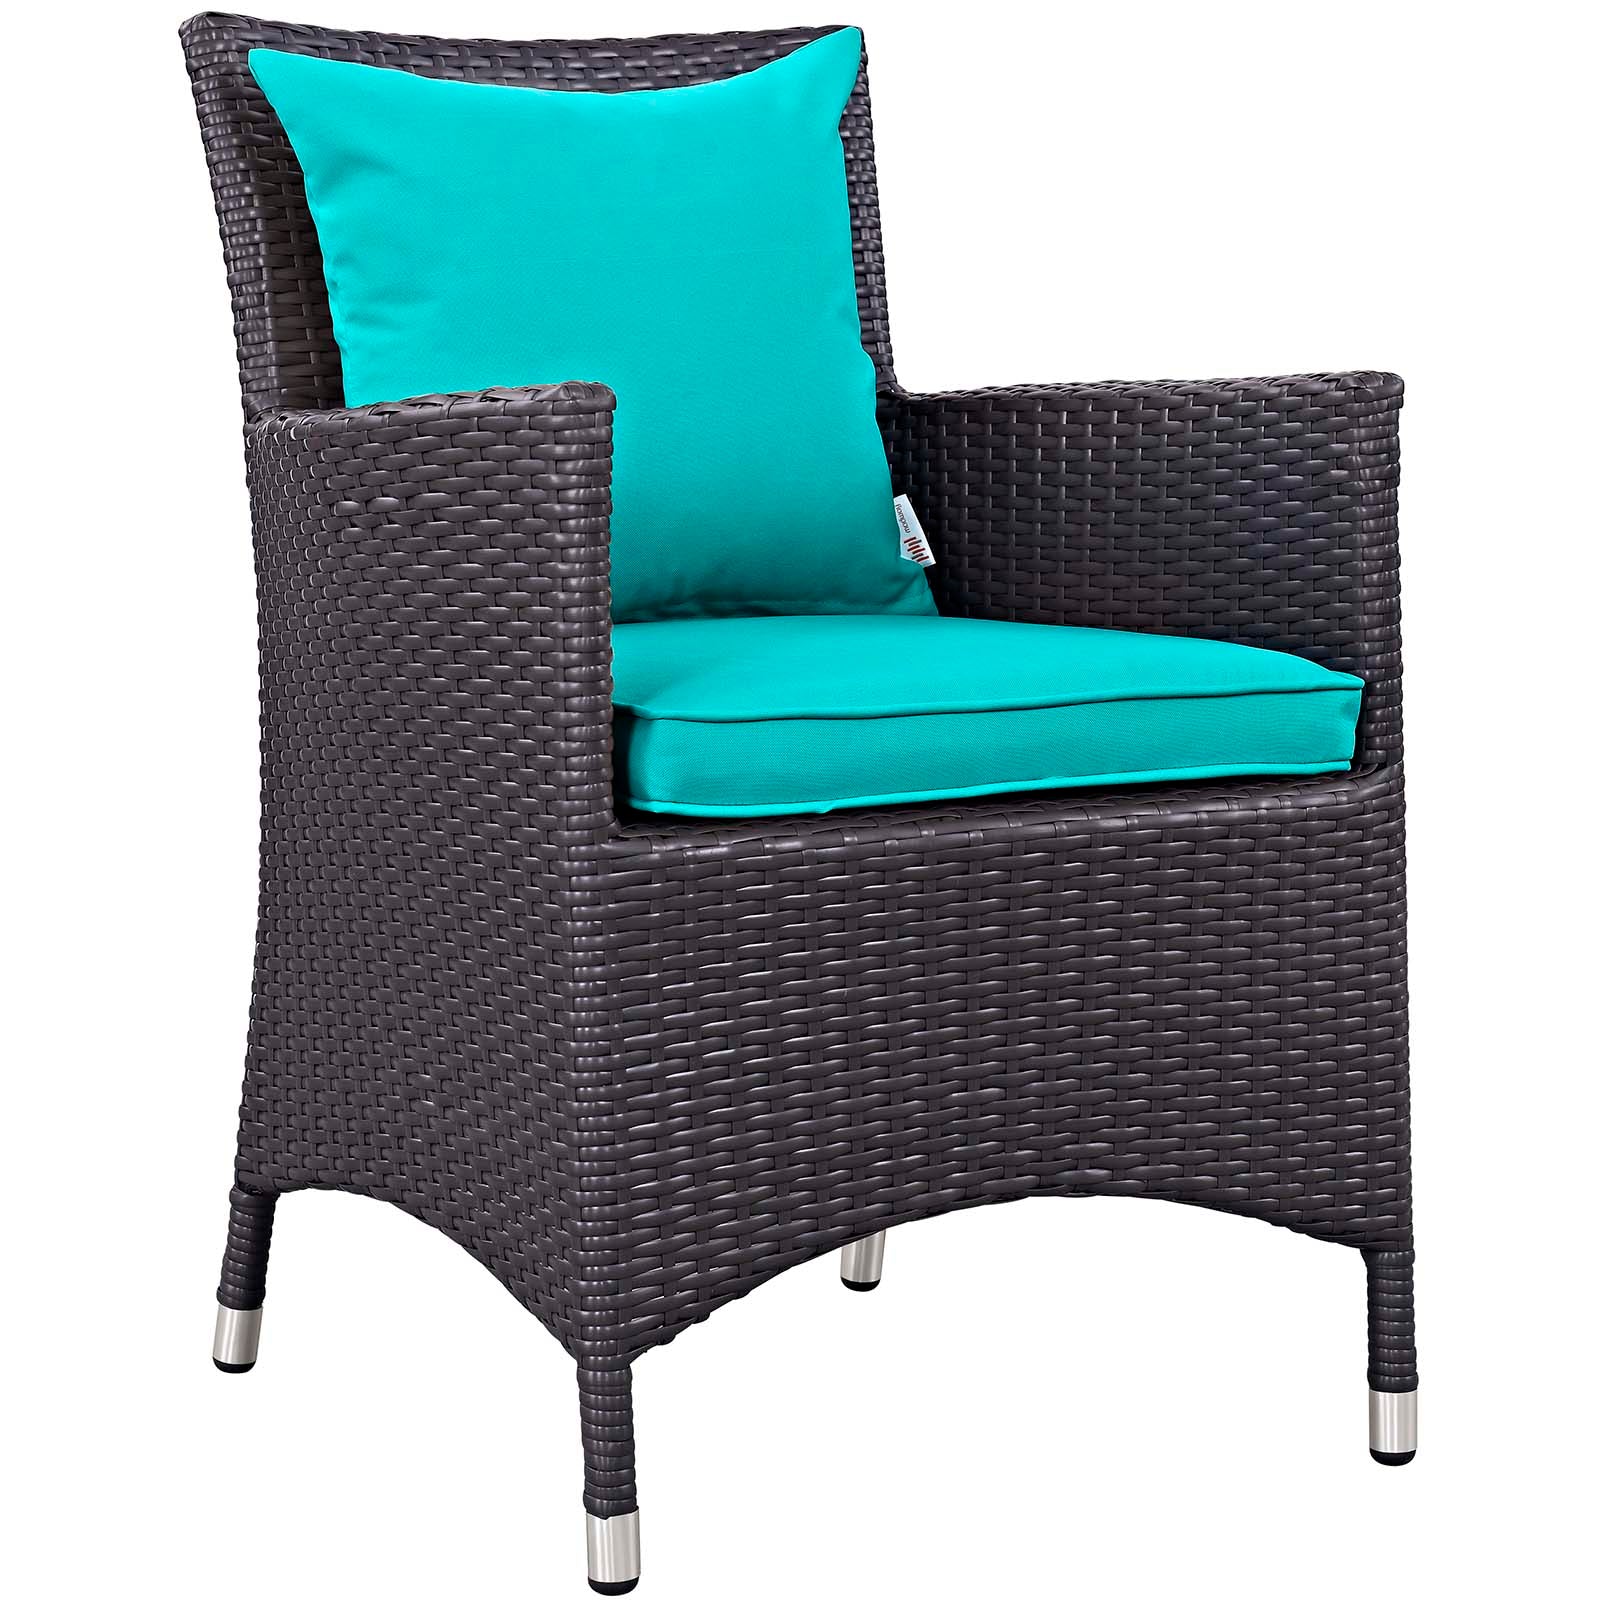 Modway Outdoor Conversation Sets - Convene 3 Piece Set Outdoor Patio with Fire Pit Espresso Turquoise